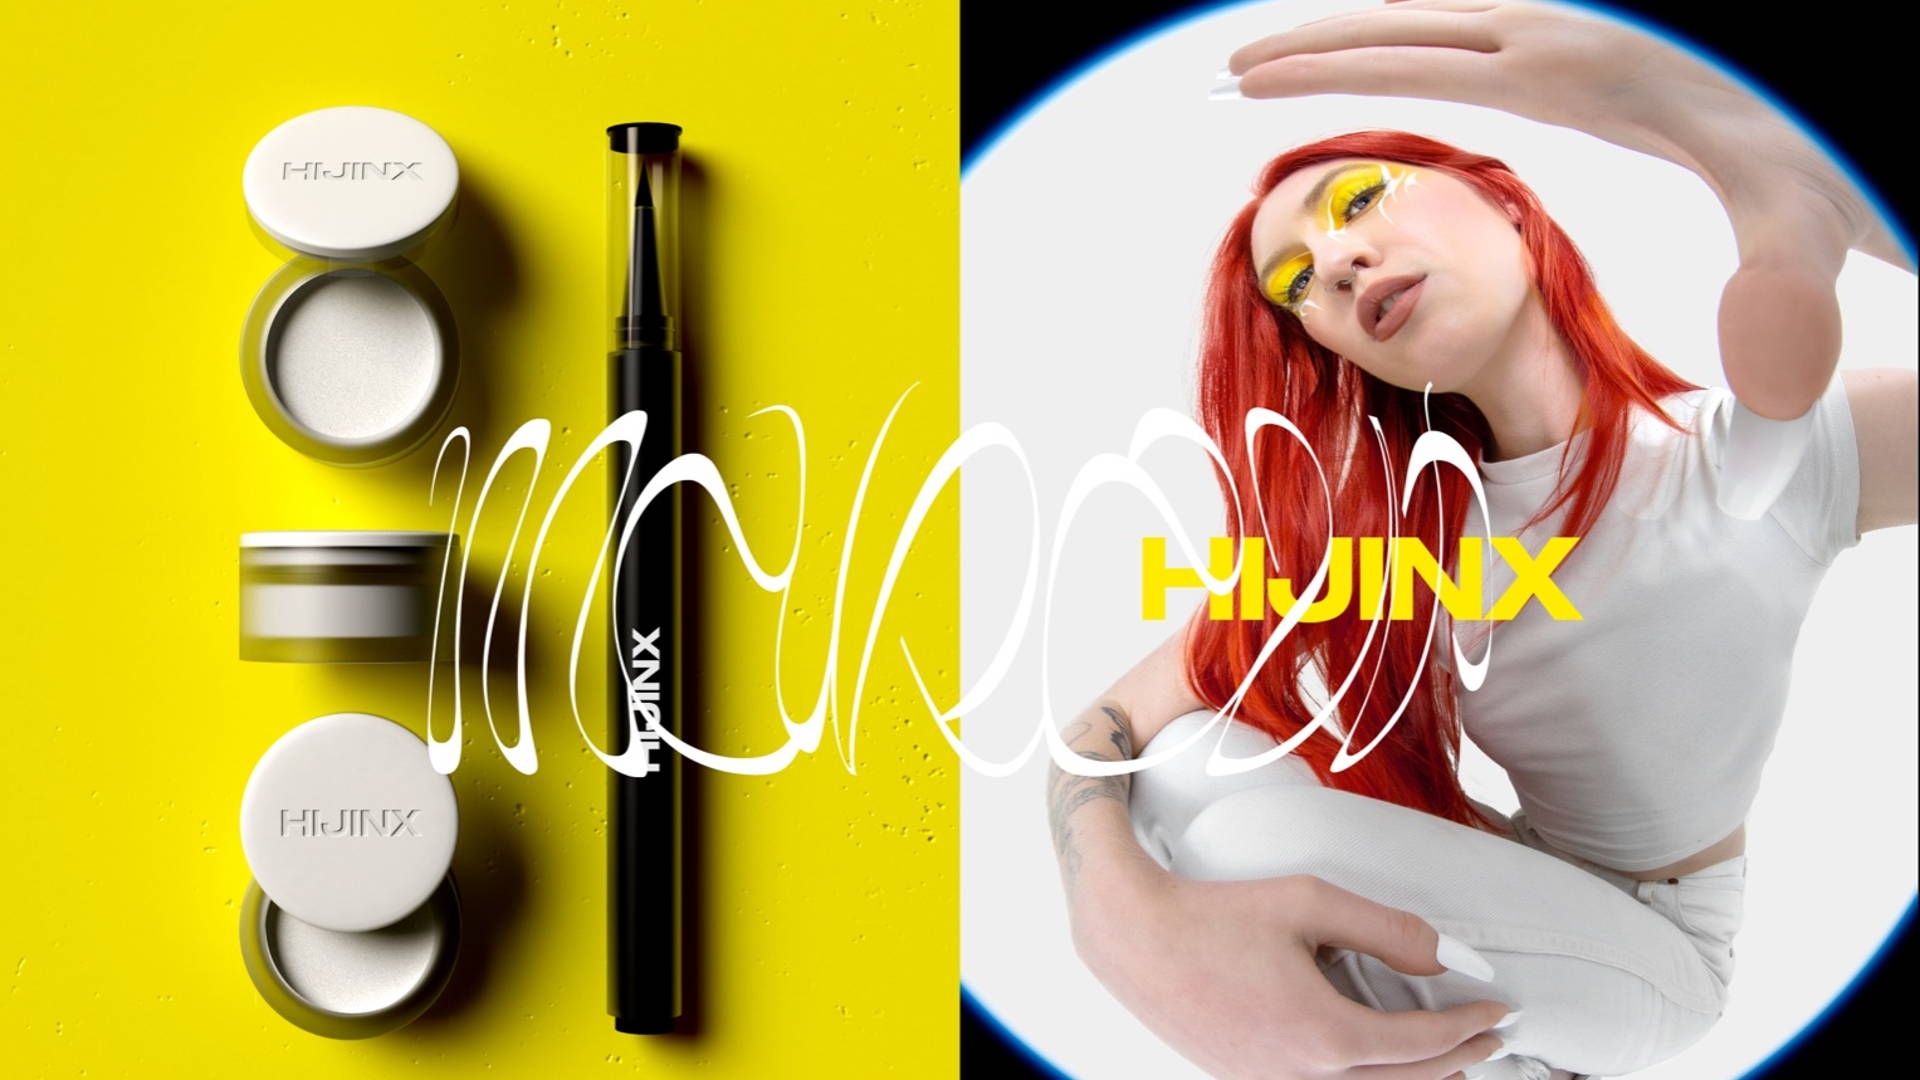 Featured image for Makeup Brand HIJINX's Identity Finds Inspiration In Self-Expression